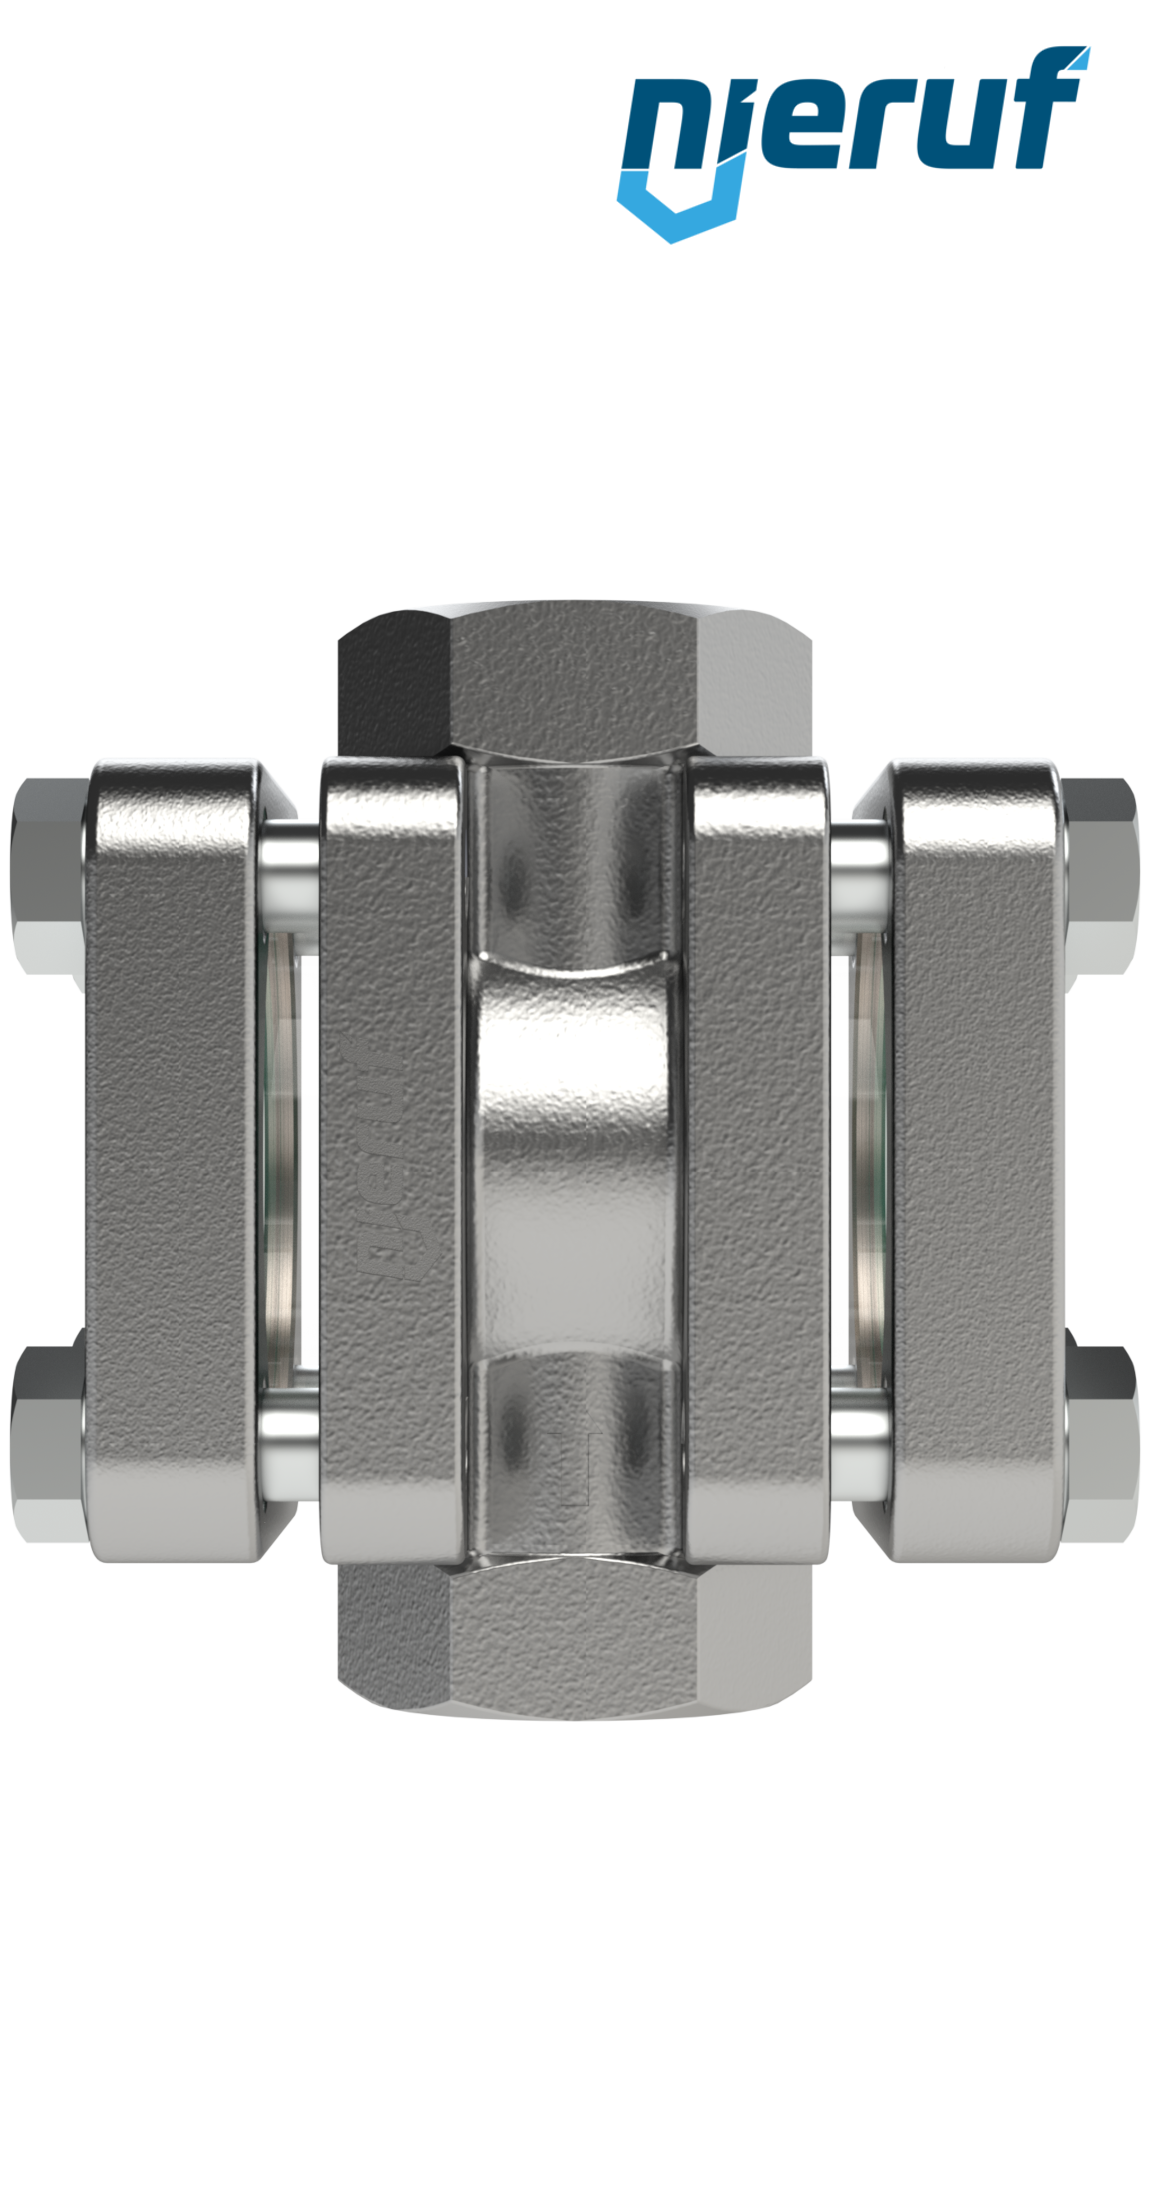 flow-through sight flow indicator DN32 - 1 1/4" inch stainless steel borosilicate glass design with disc